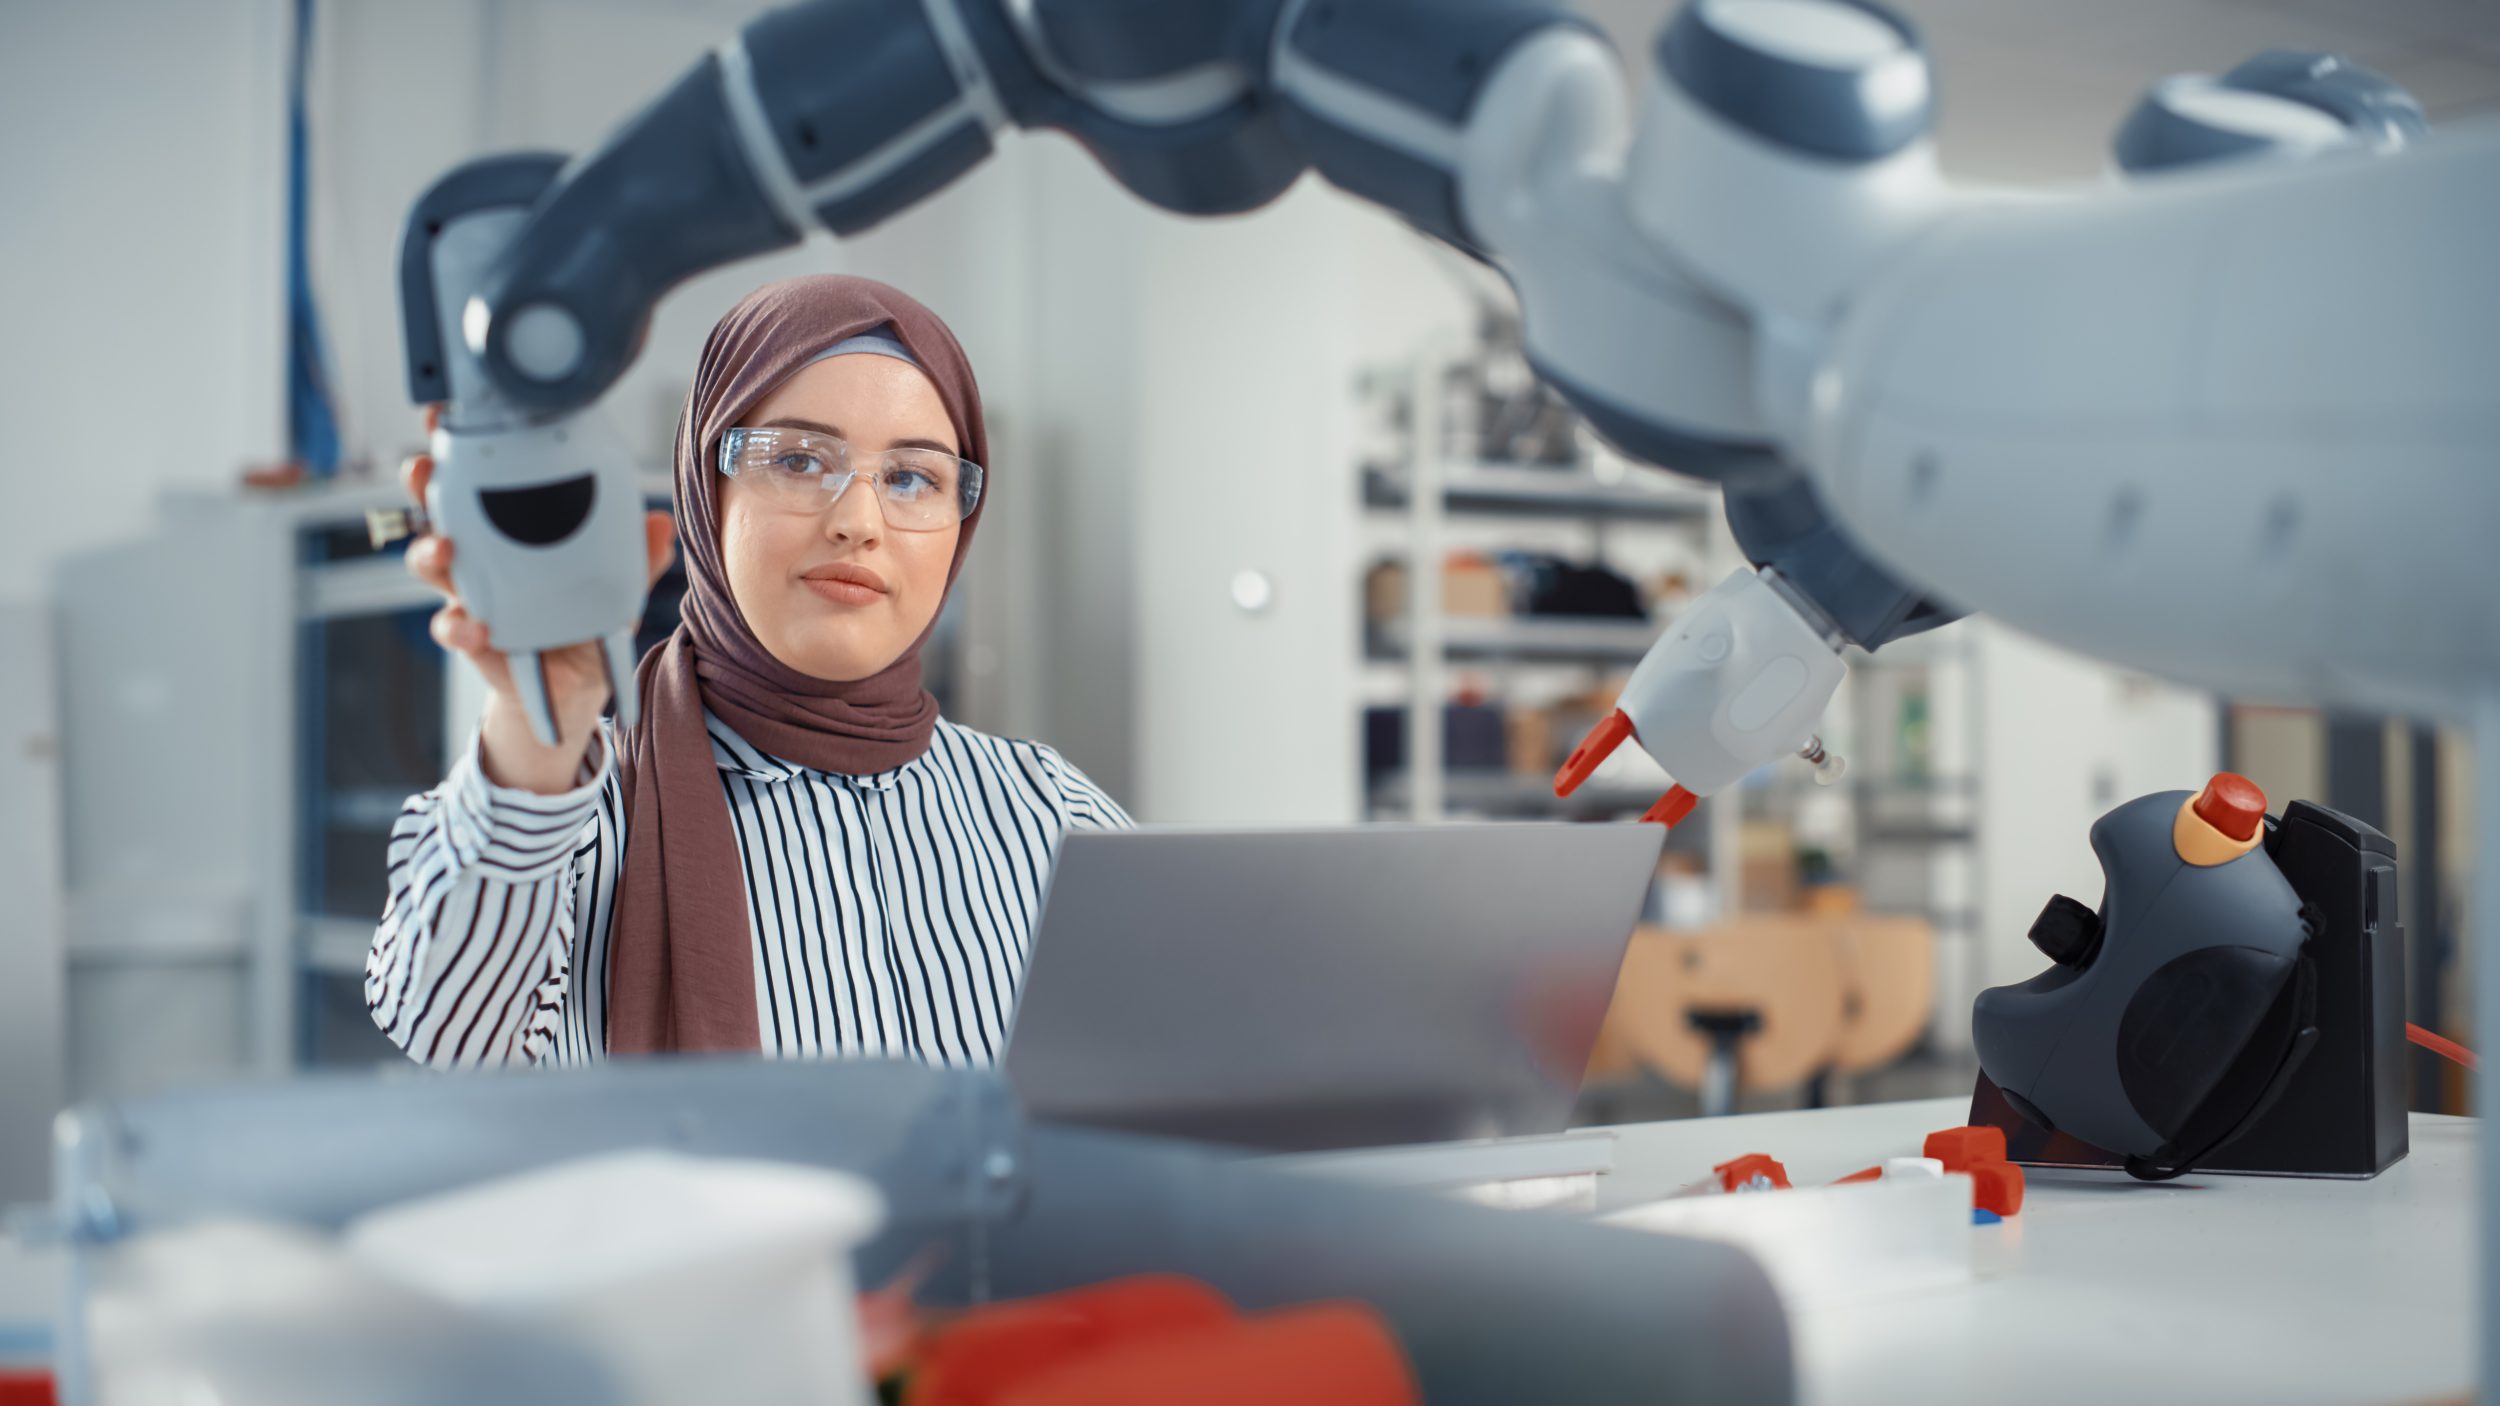 Muslim Businesswoman Wearing Hijab and Working on Engineering Project, Coding on Laptop and Changing industrial computer Robot Hand Position.